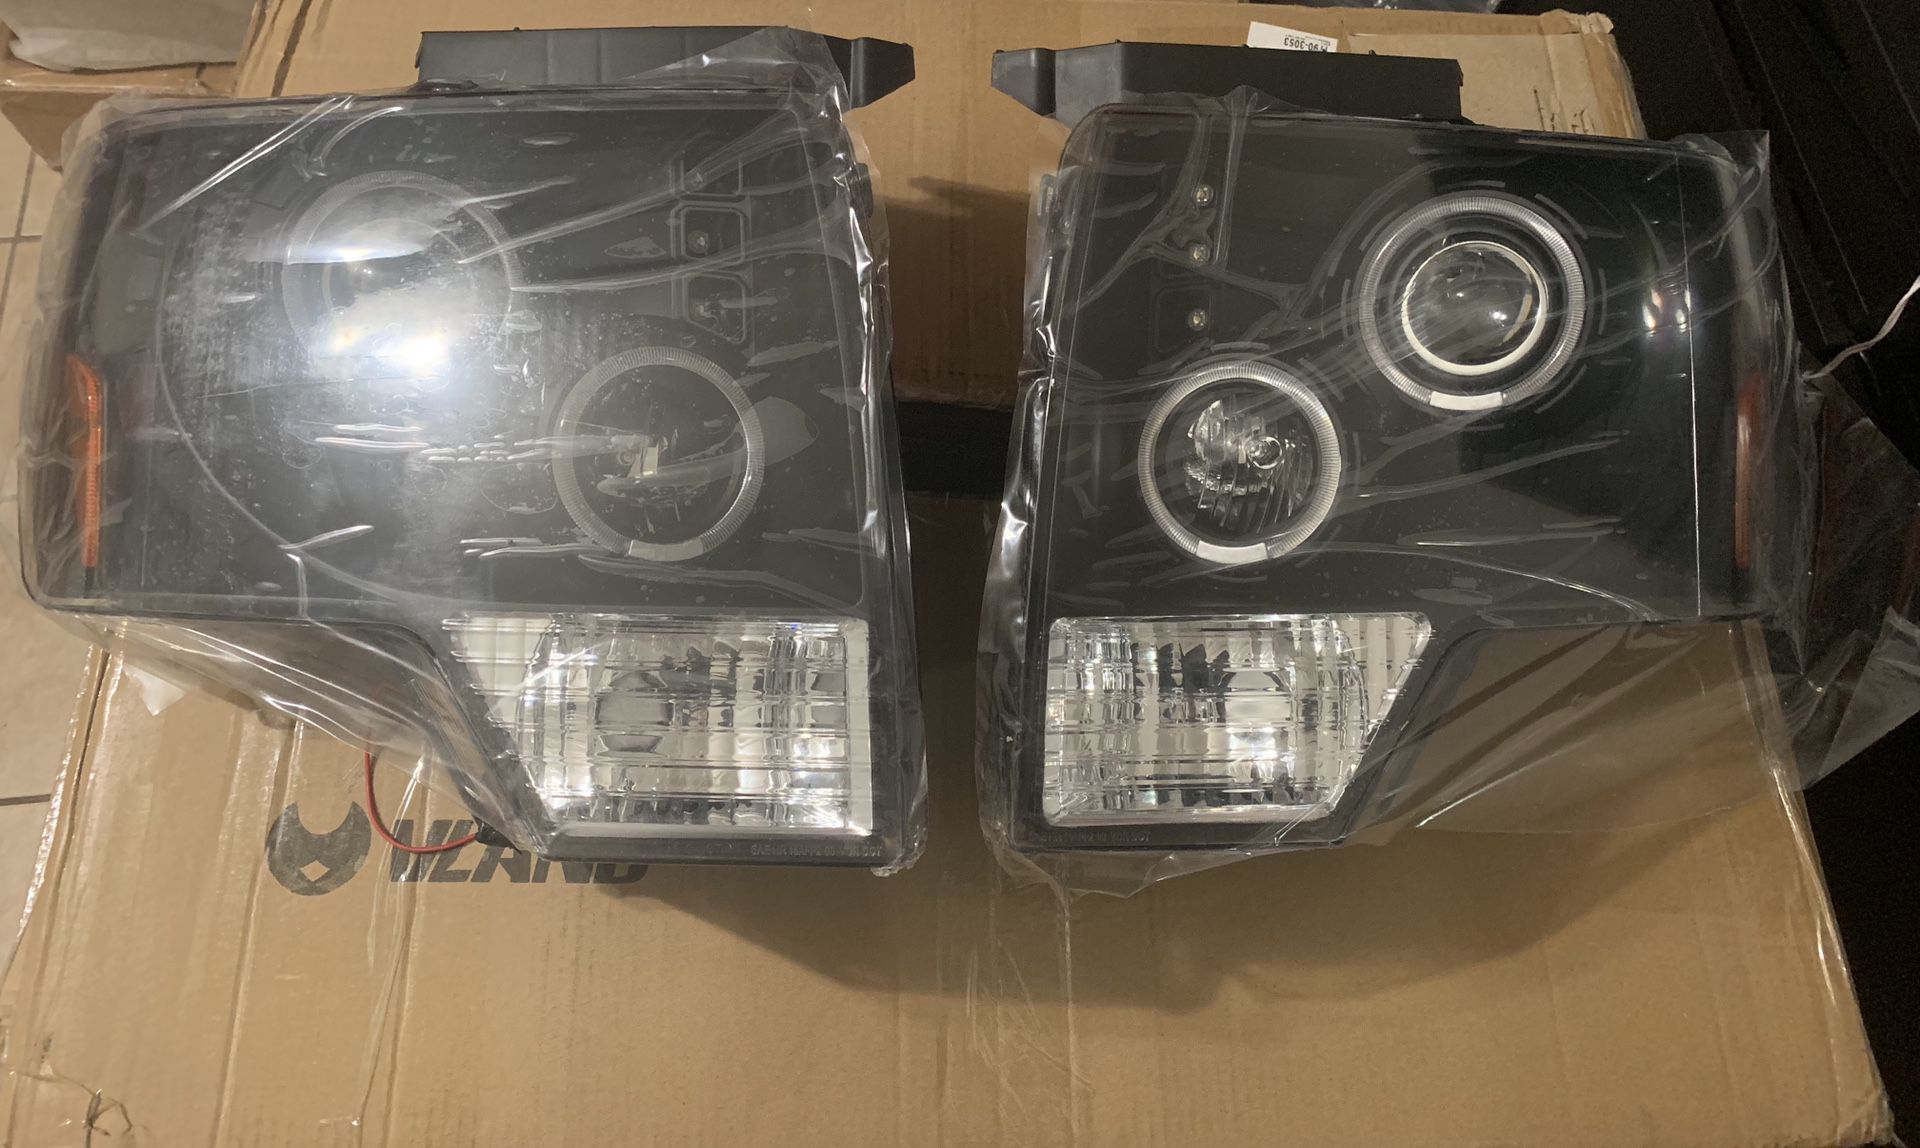 09-14 FORD F-150 DUAL ANGEL EYES HALO PROJECTOR HEADLIGHTS WITH AMBER REFLECTOR LIGHTING KIT